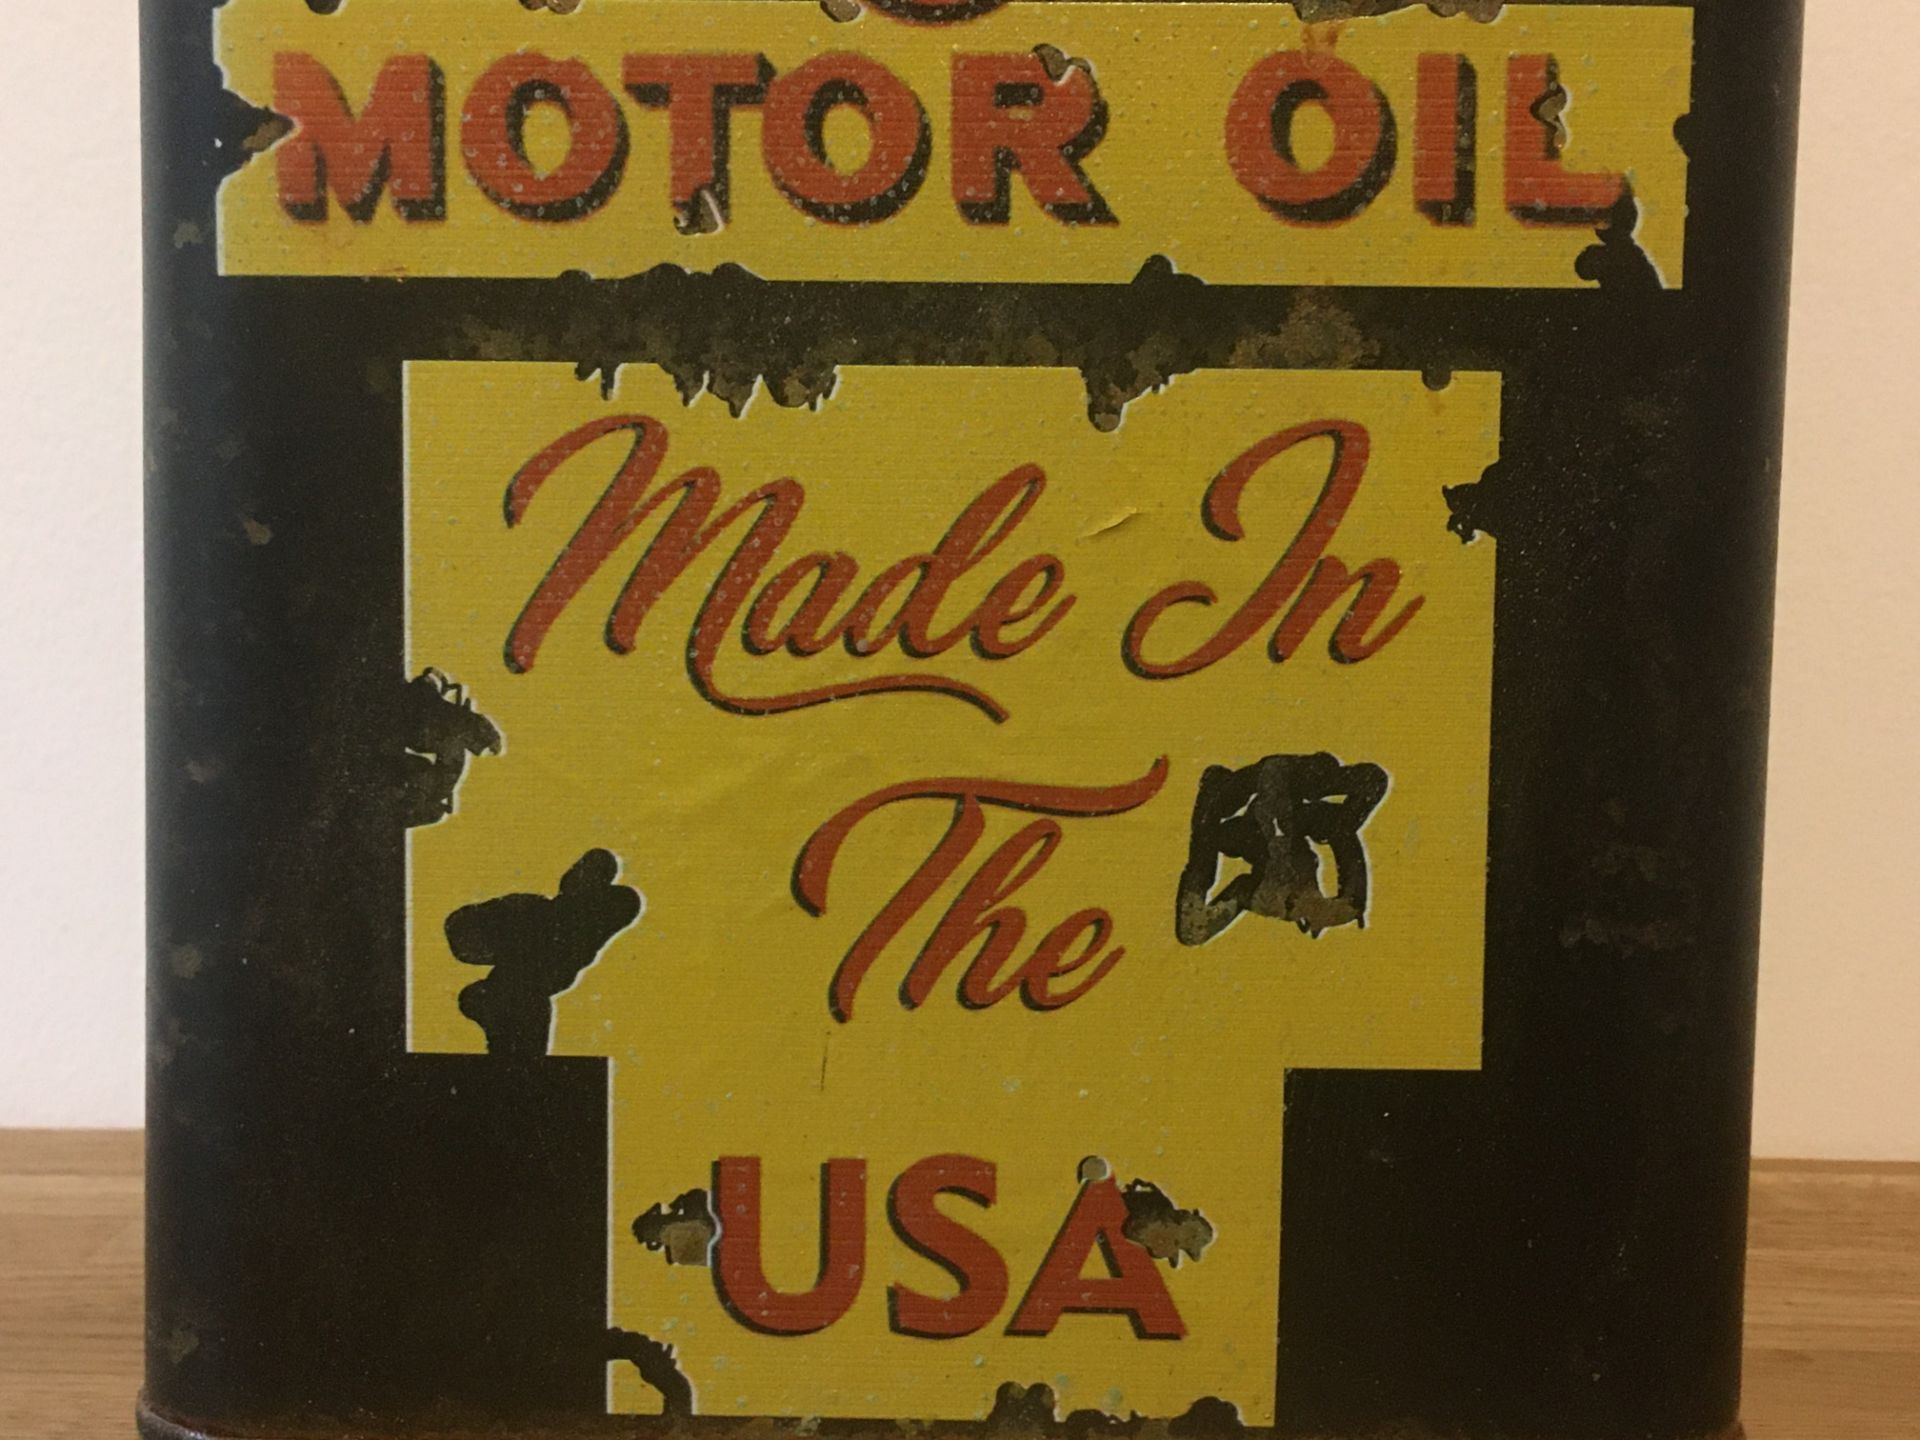 Shell Motor Oil Petrol Can - Image 3 of 6